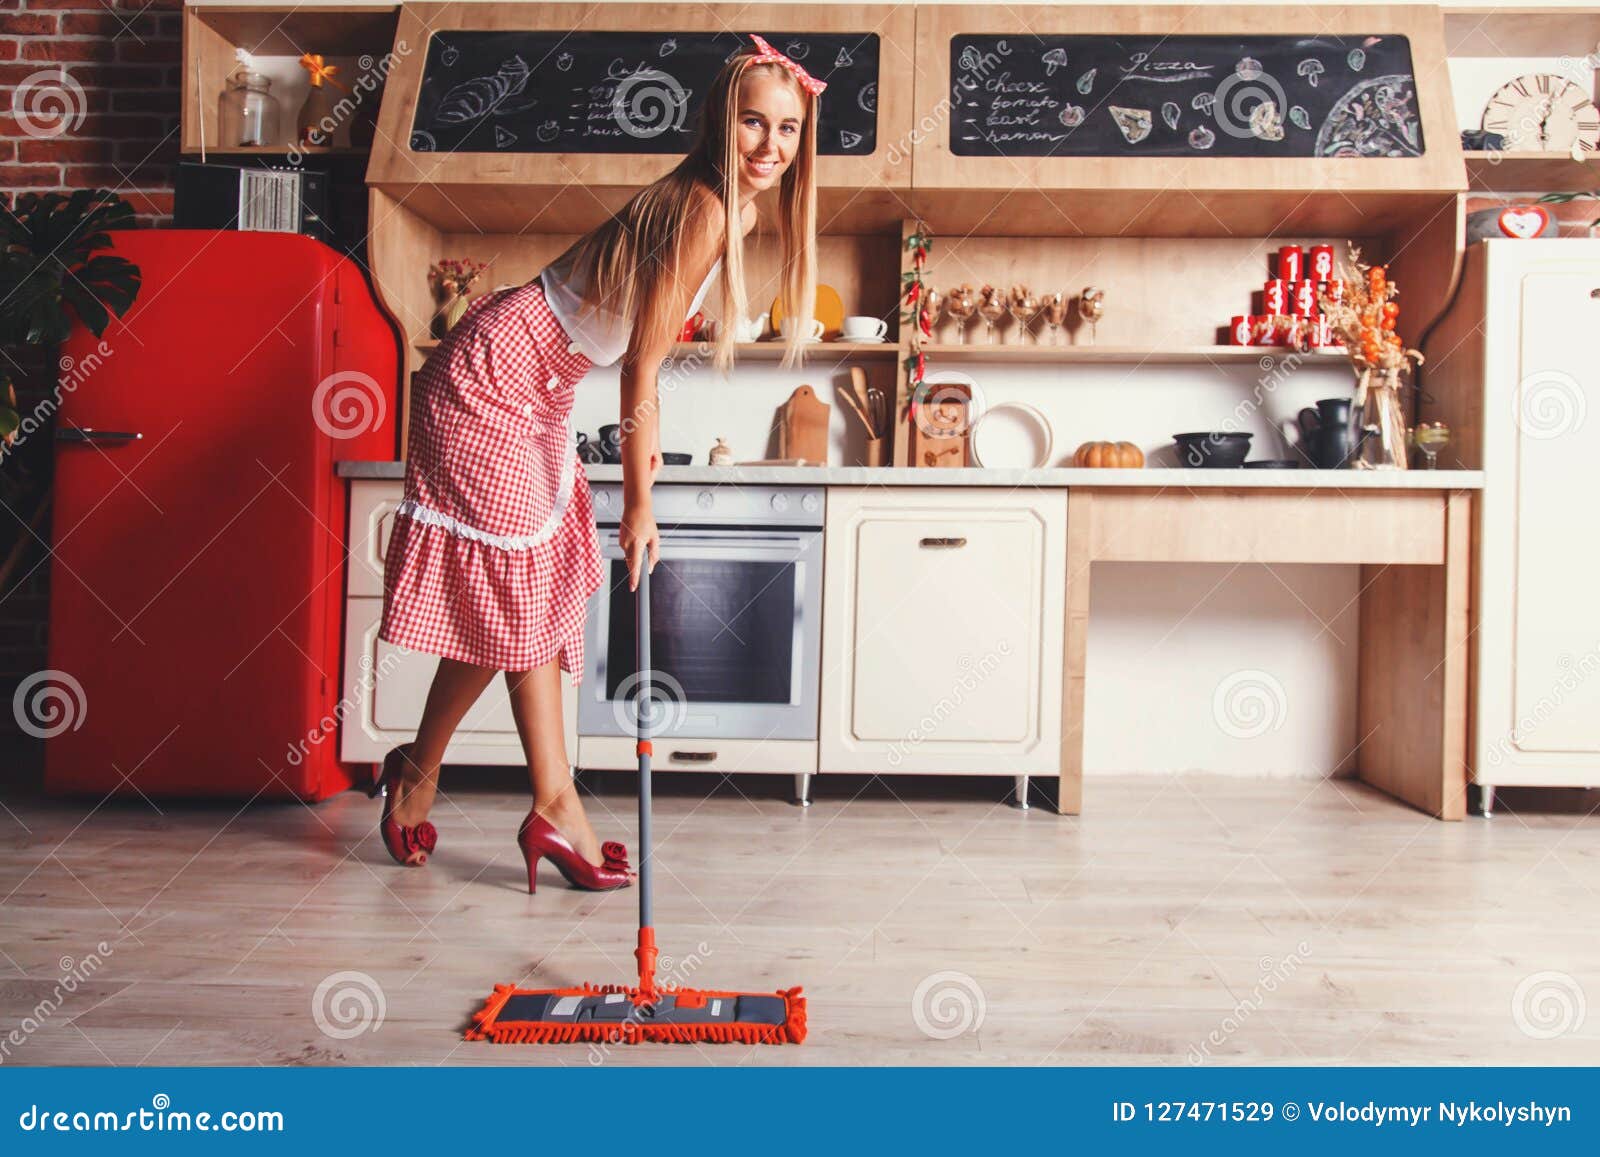 woman is moping the floor